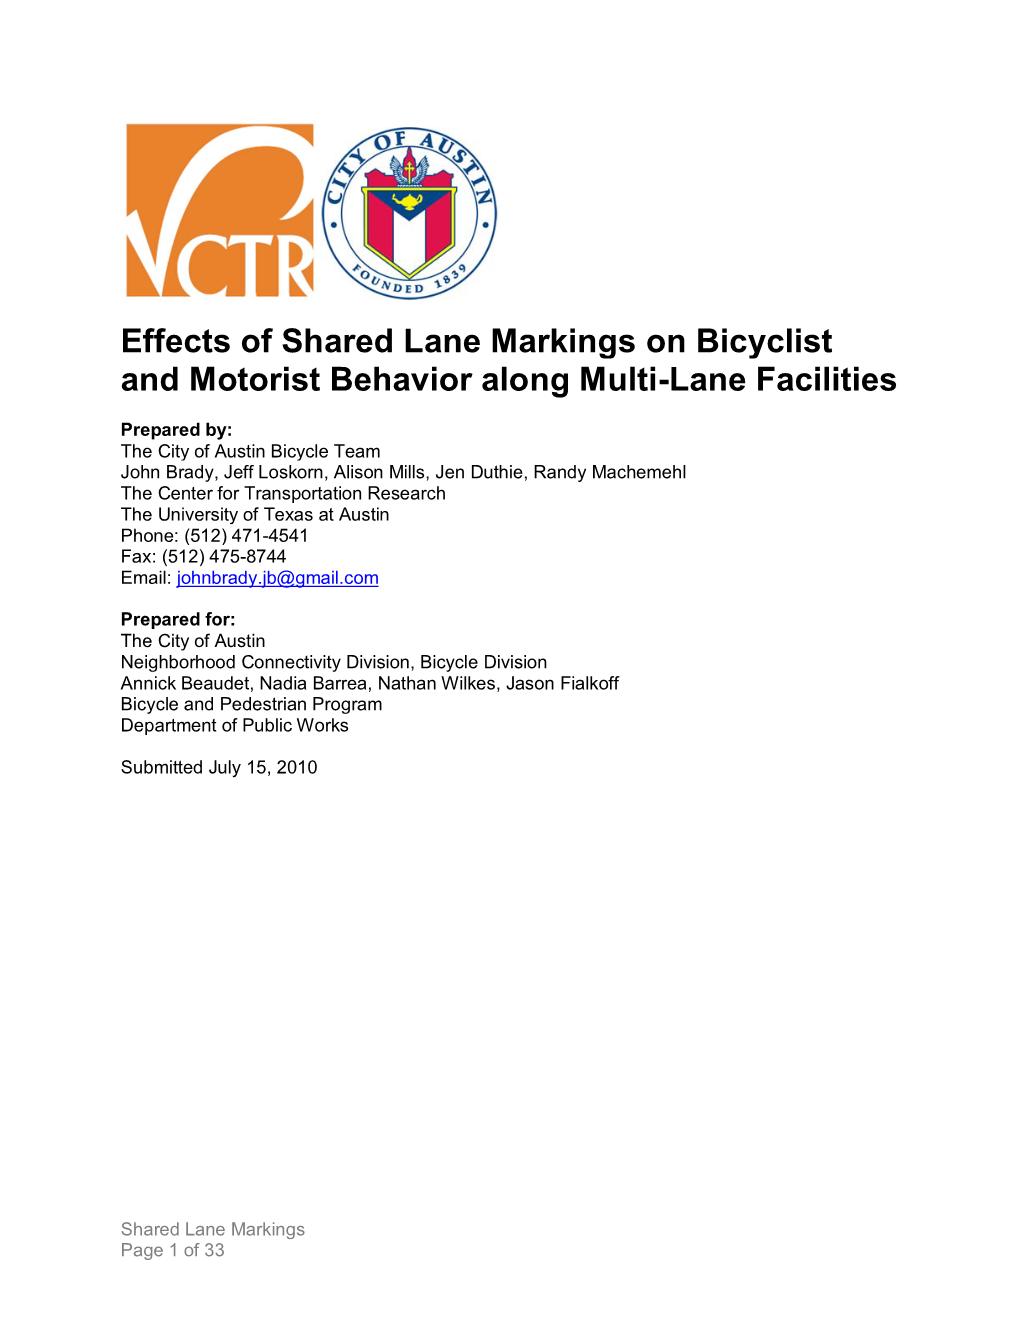 Effects of Shared Lane Markings on Bicyclist and Motorist Behavior Along Multi-Lane Facilities